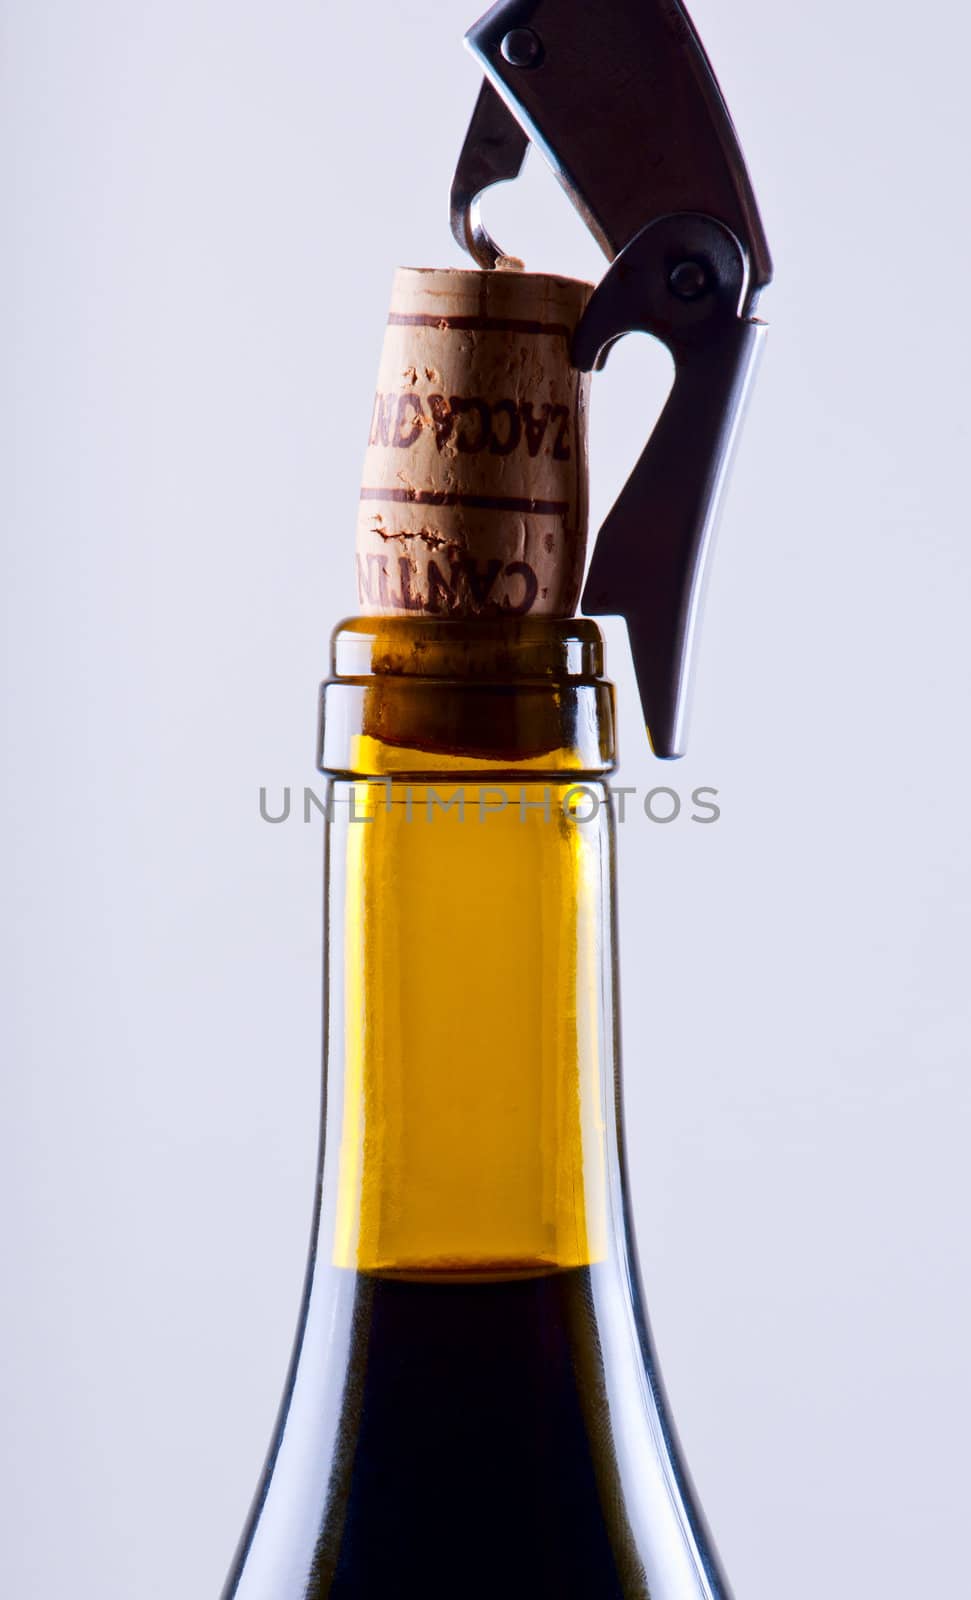 Corkscrew and wine stopper with a yellow bottle  by Nanisimova